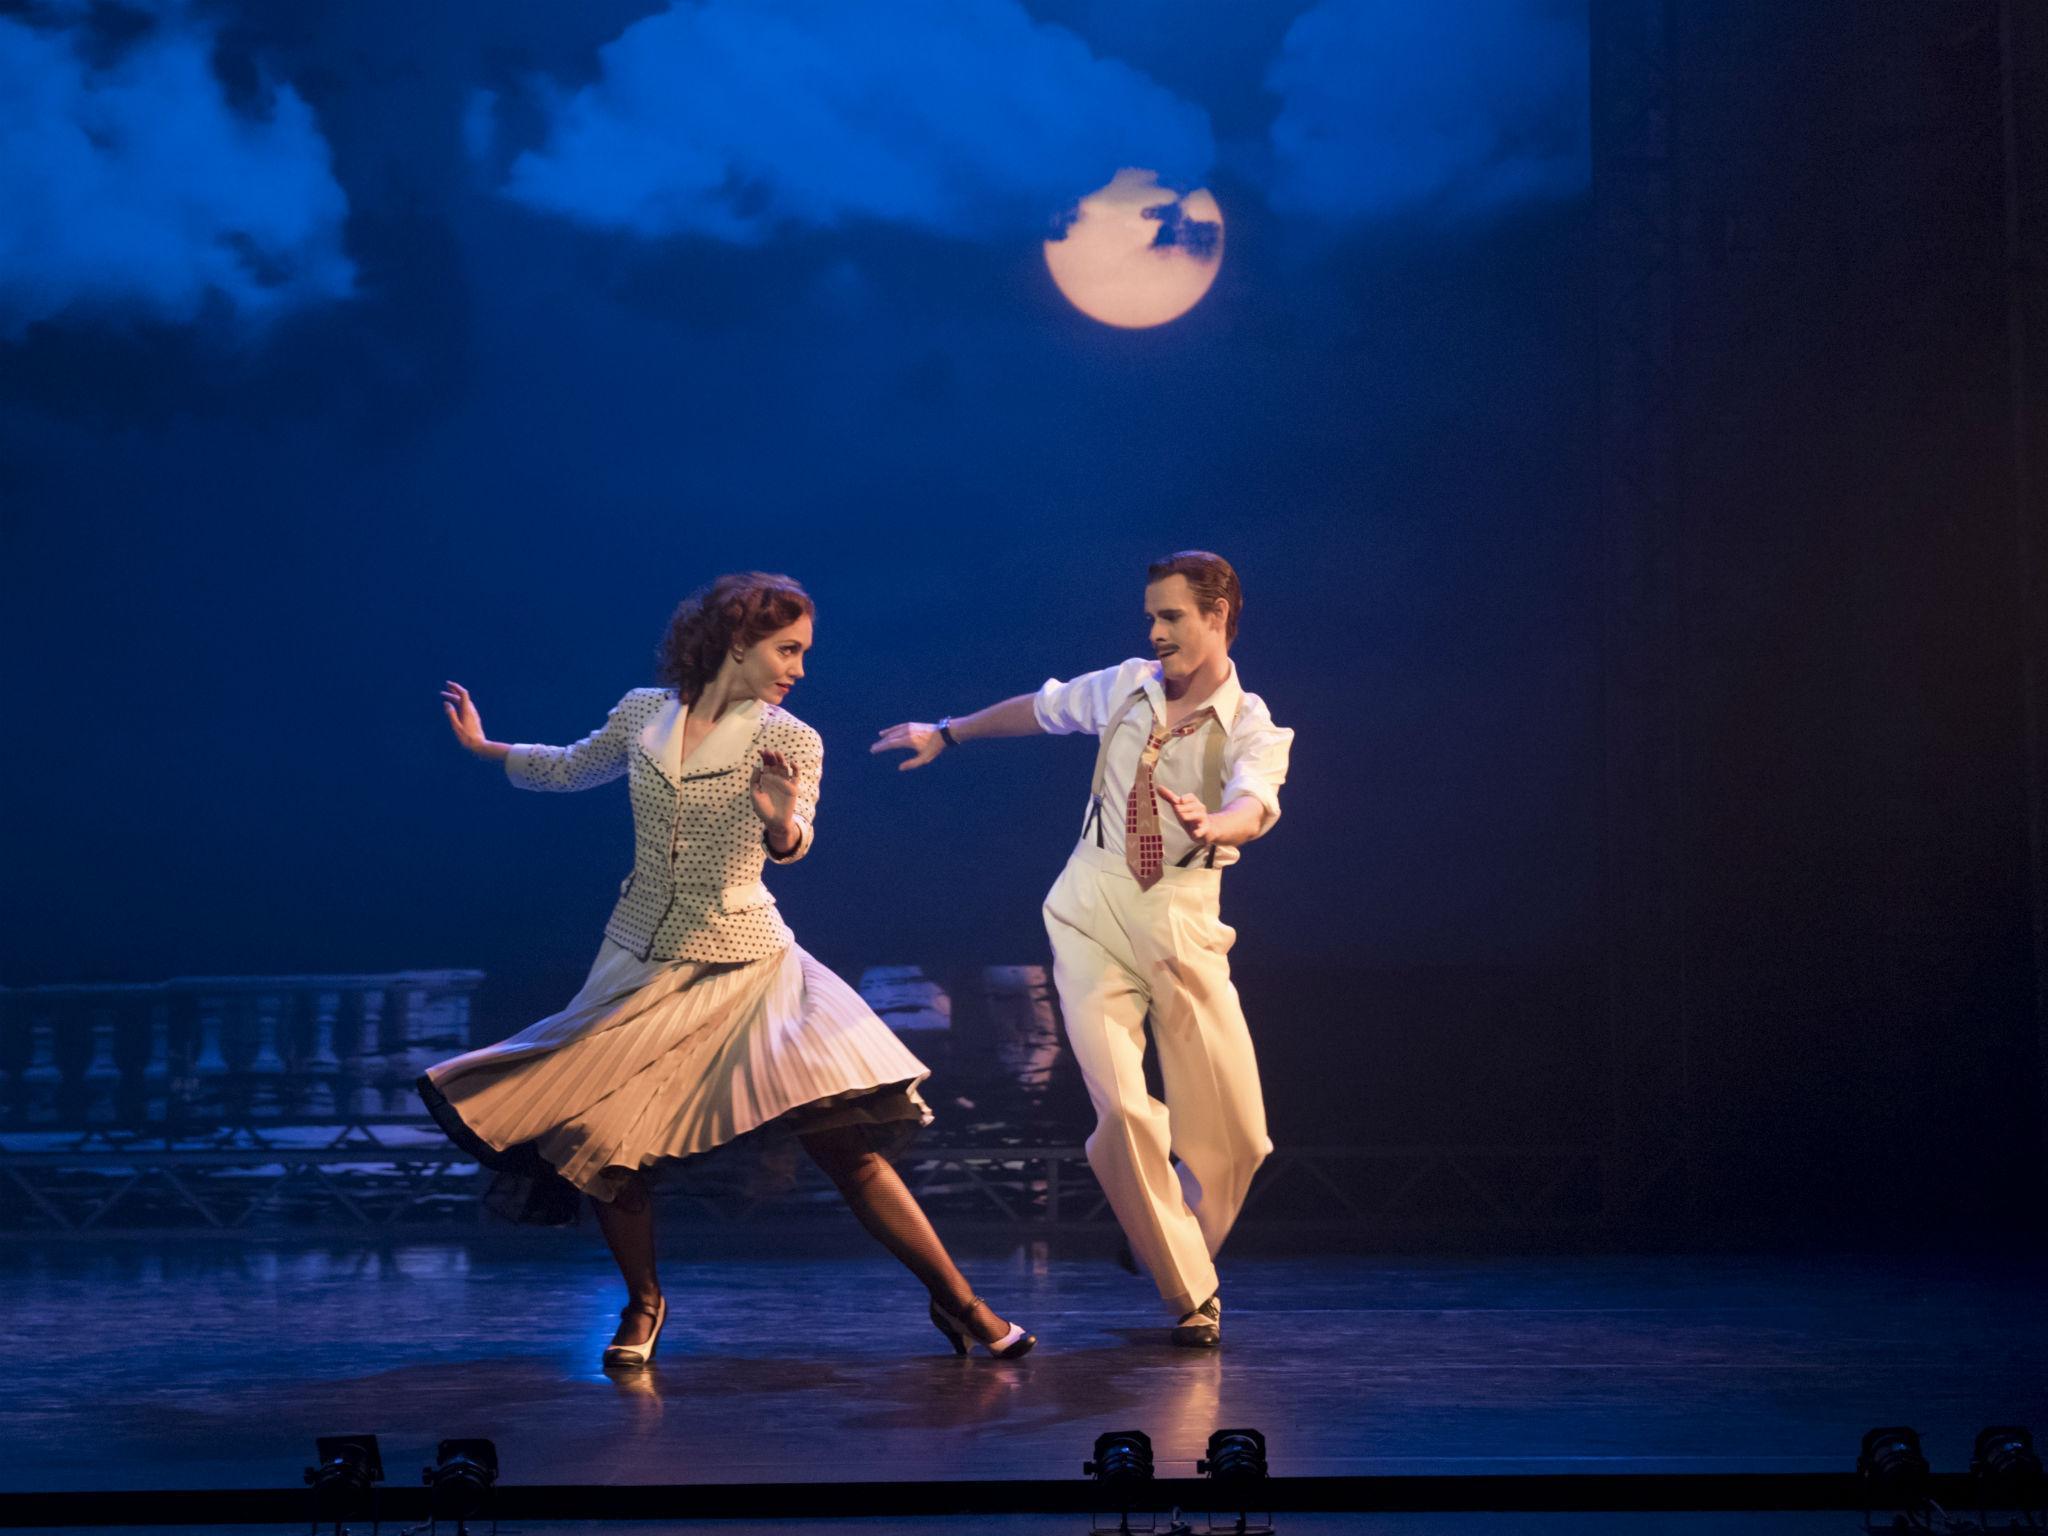 Ashley Shaw and Sam Archer as Victoria Page and Boris Lermontov bring a cinema classic to the stage in Matthew Bourne’s in ‘The Red Shoes’